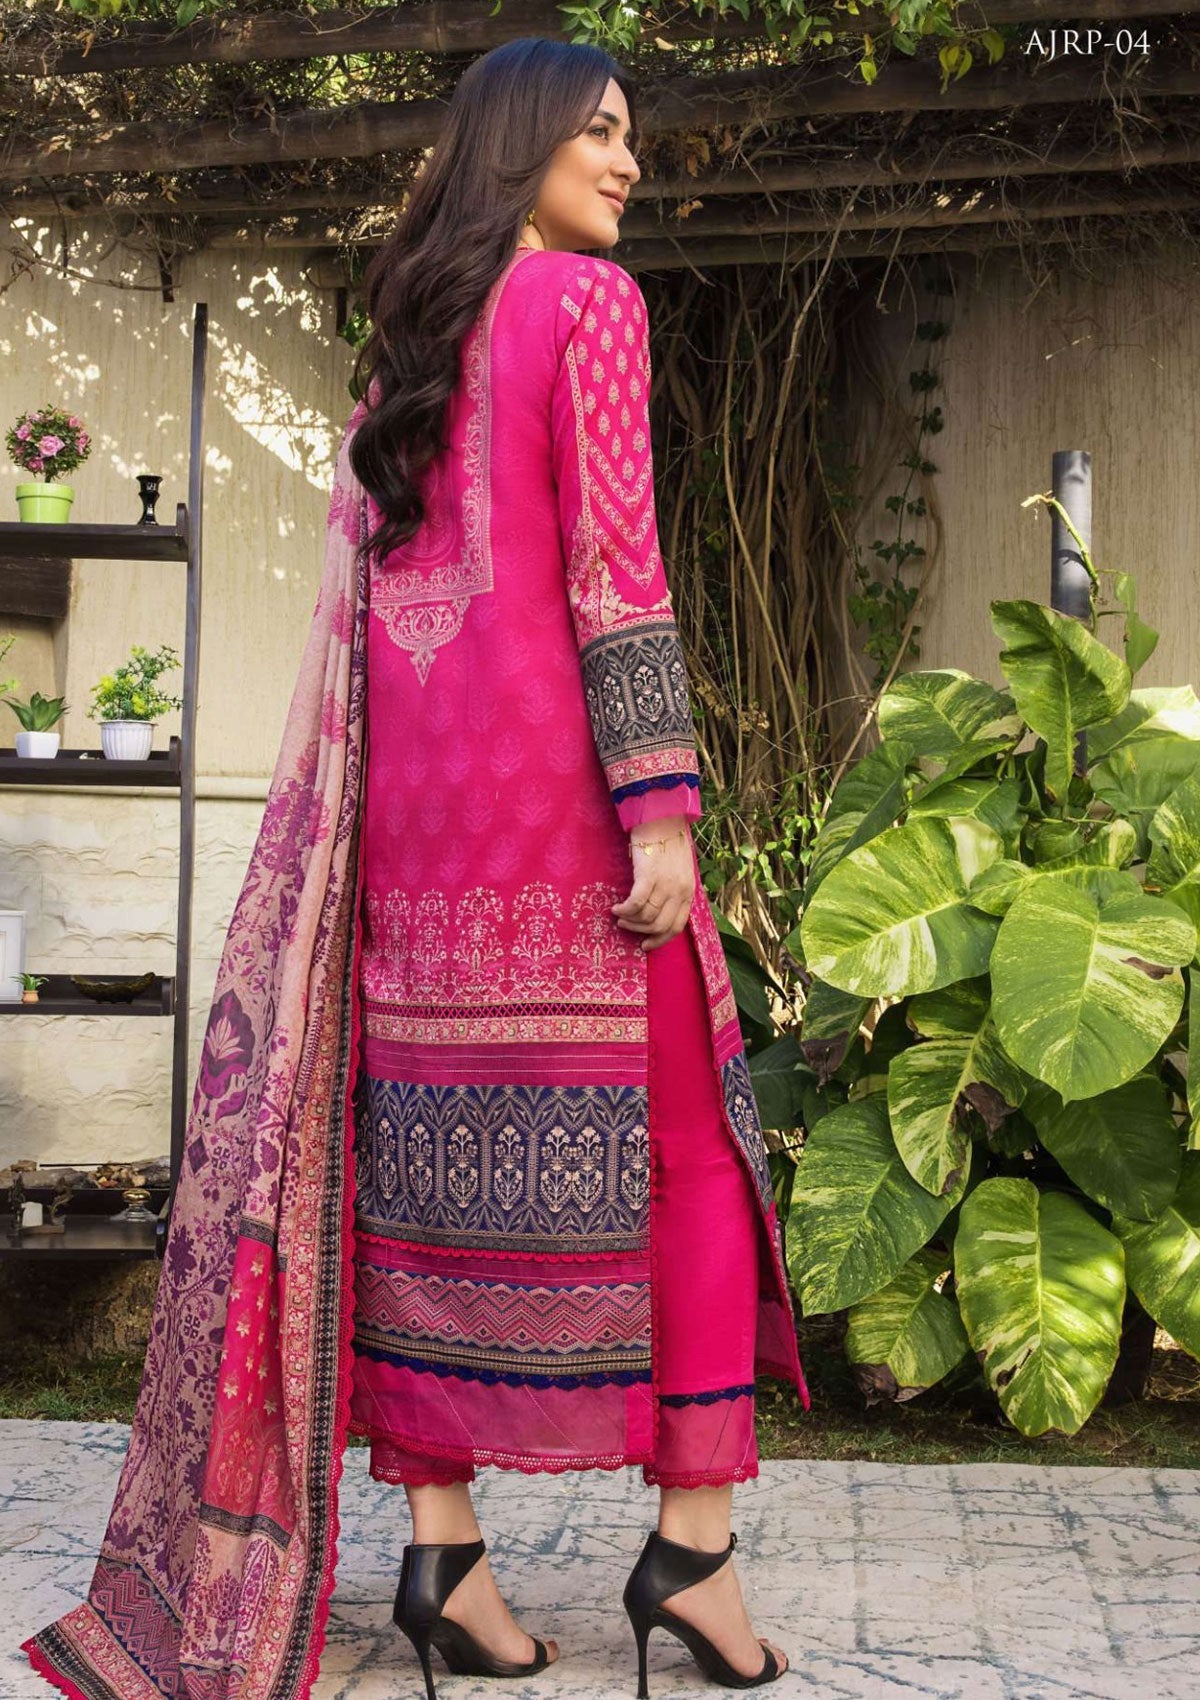 Lawn Collection - Asim Jofa - Rania - AJRP#04 available at Saleem Fabrics Traditions